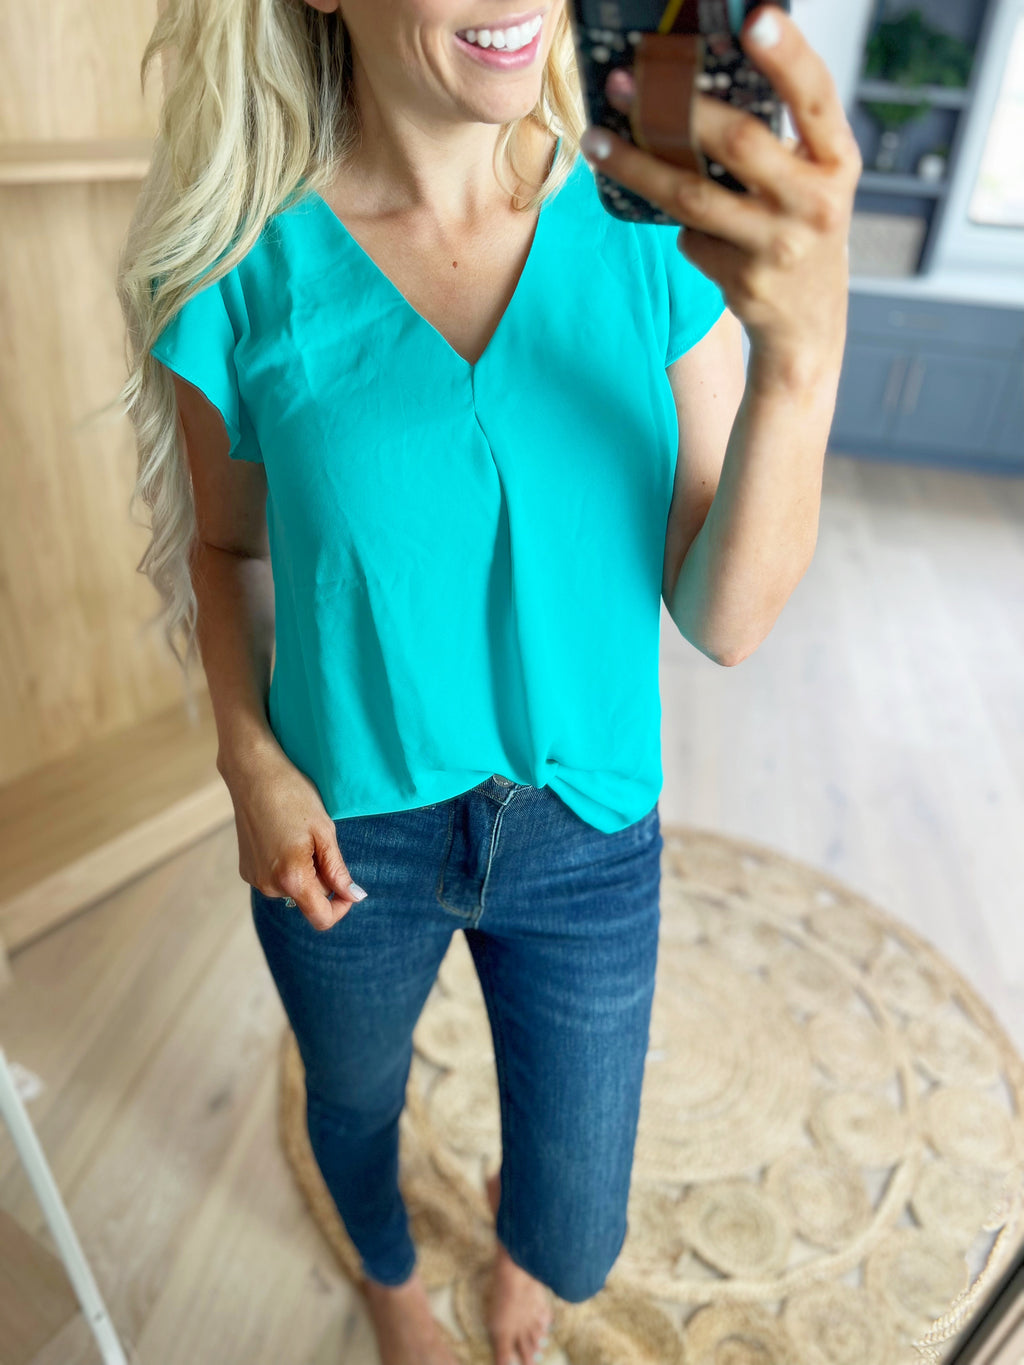 Party Girl V-Neck Tulip Sleeve Blouse in Emerald